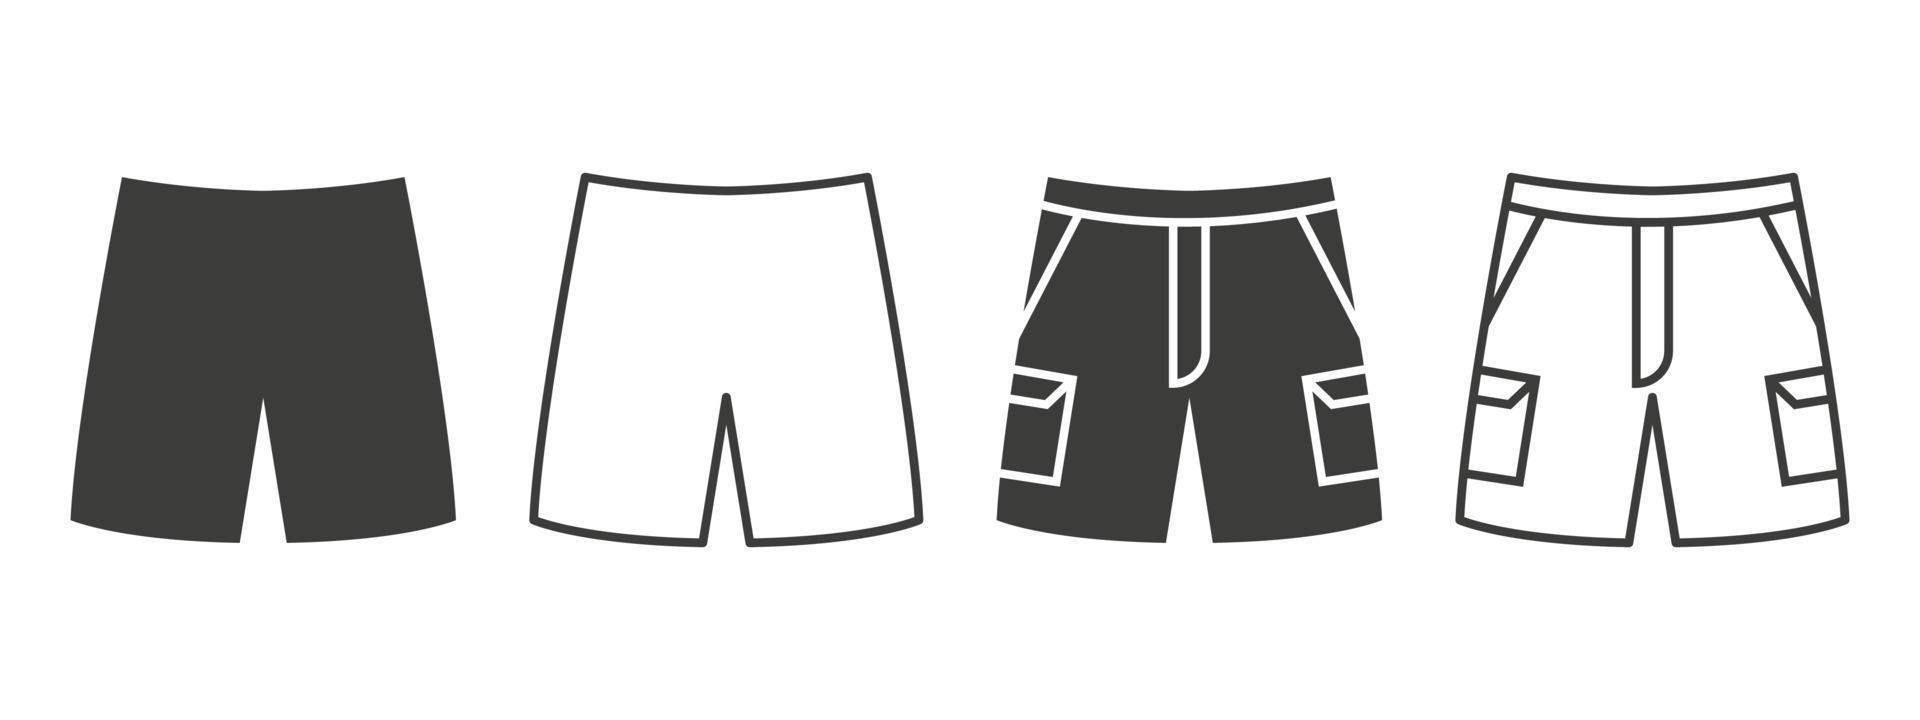 Shorts icons. Shorts with pockets of different styles. Clothing symbol concept. Vector illustration